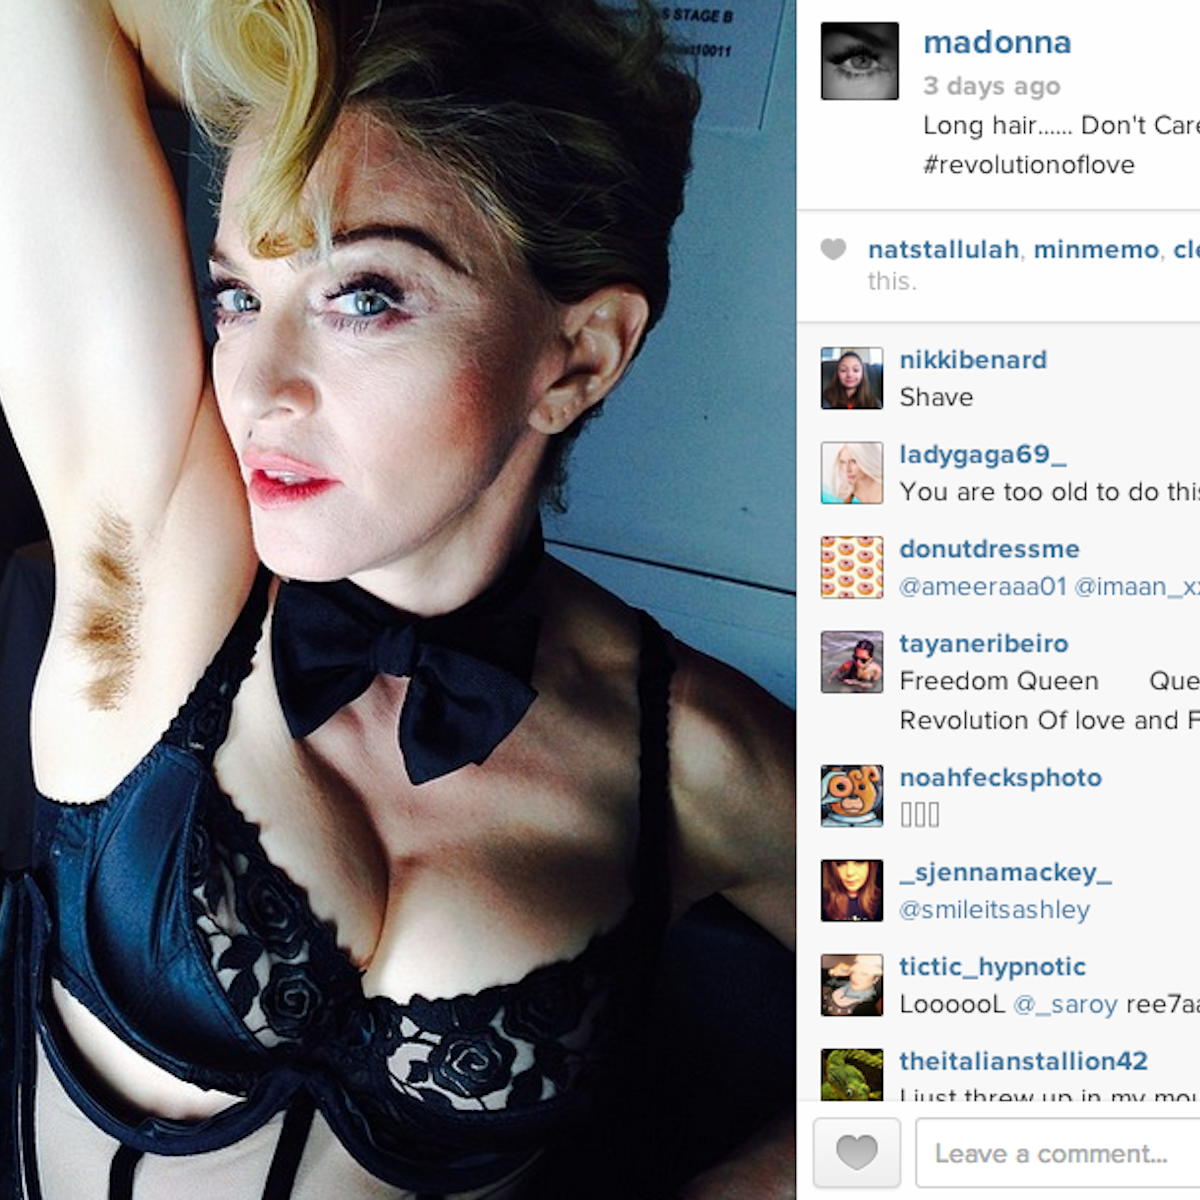 The truth about Madonna's hairy armpits and sexy older women